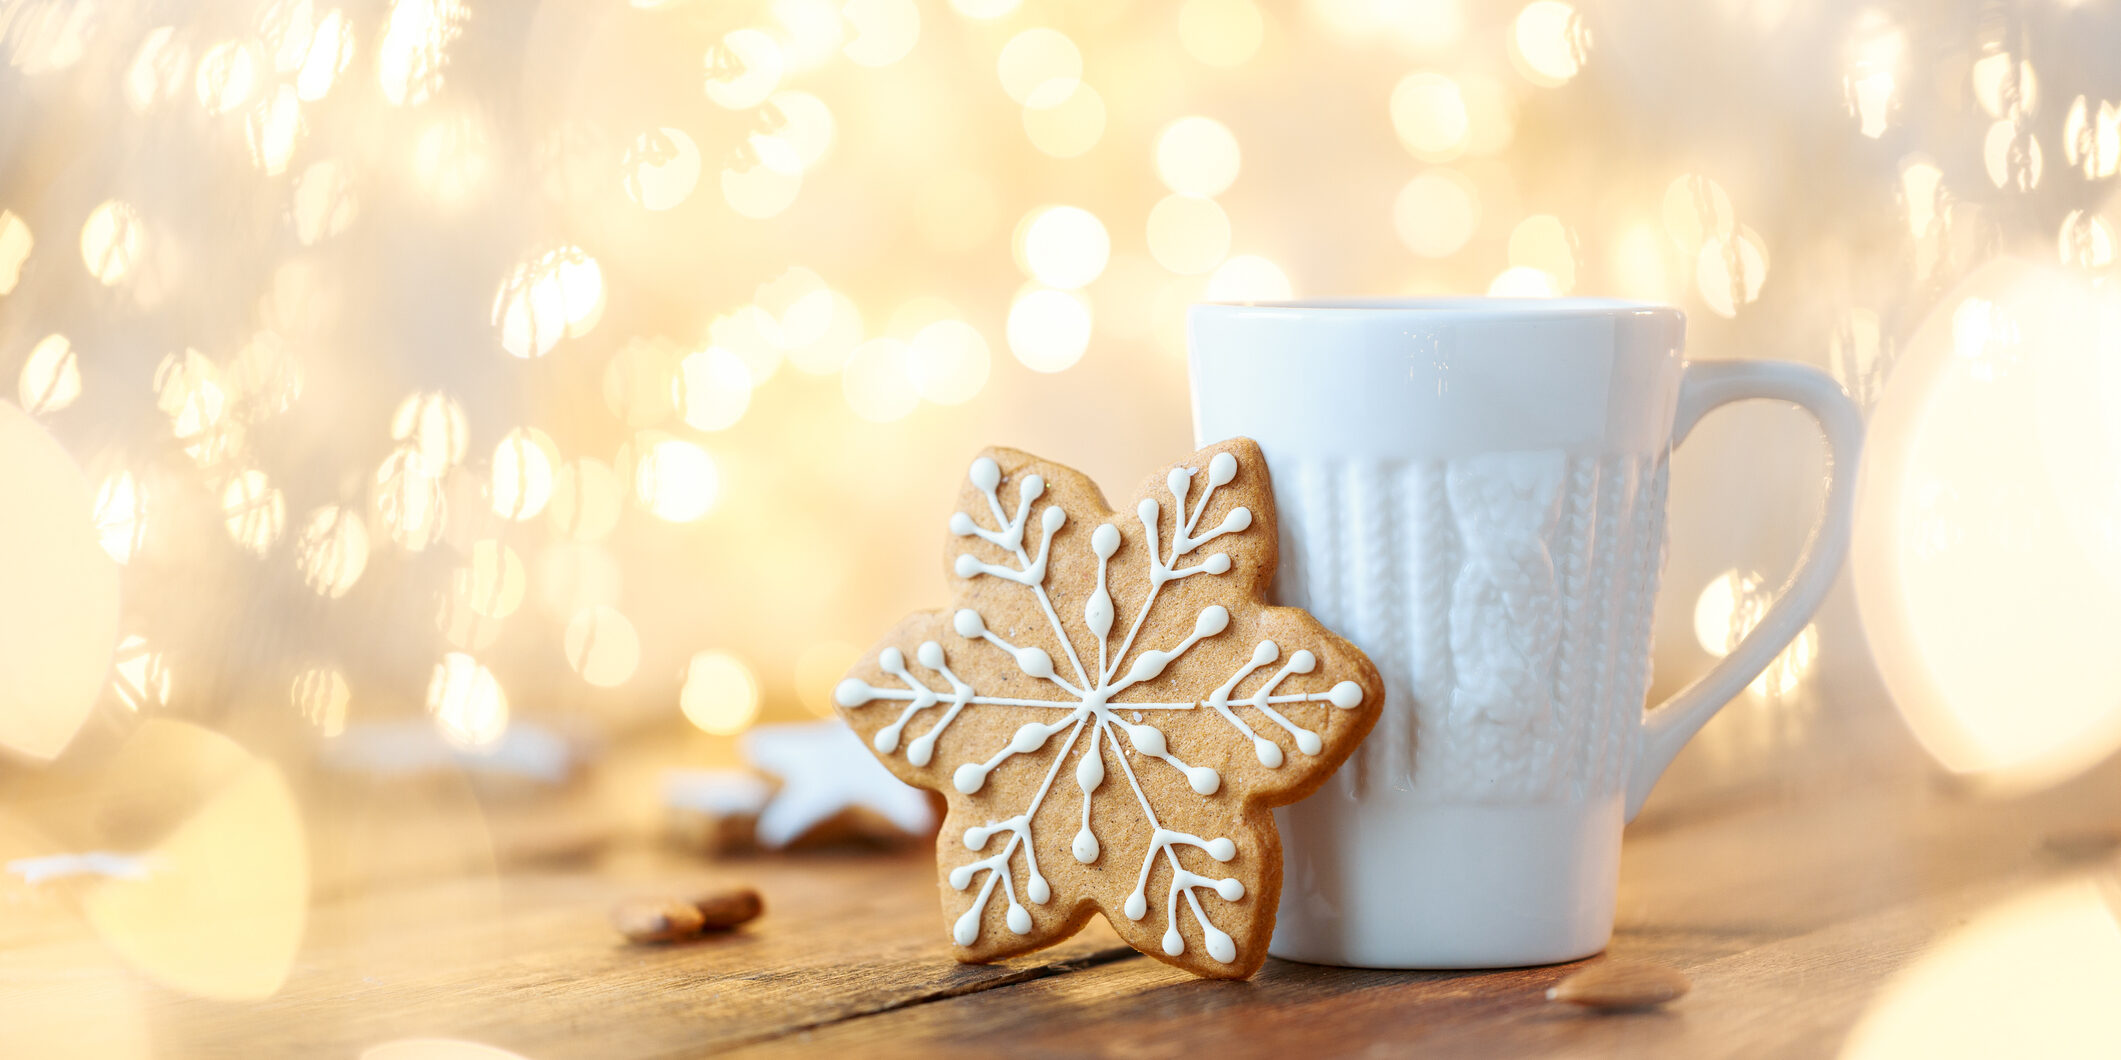 A beautiful white mug with a knitted print and a ginger cookie with icing in the shape of a snowflake on a background of garlands